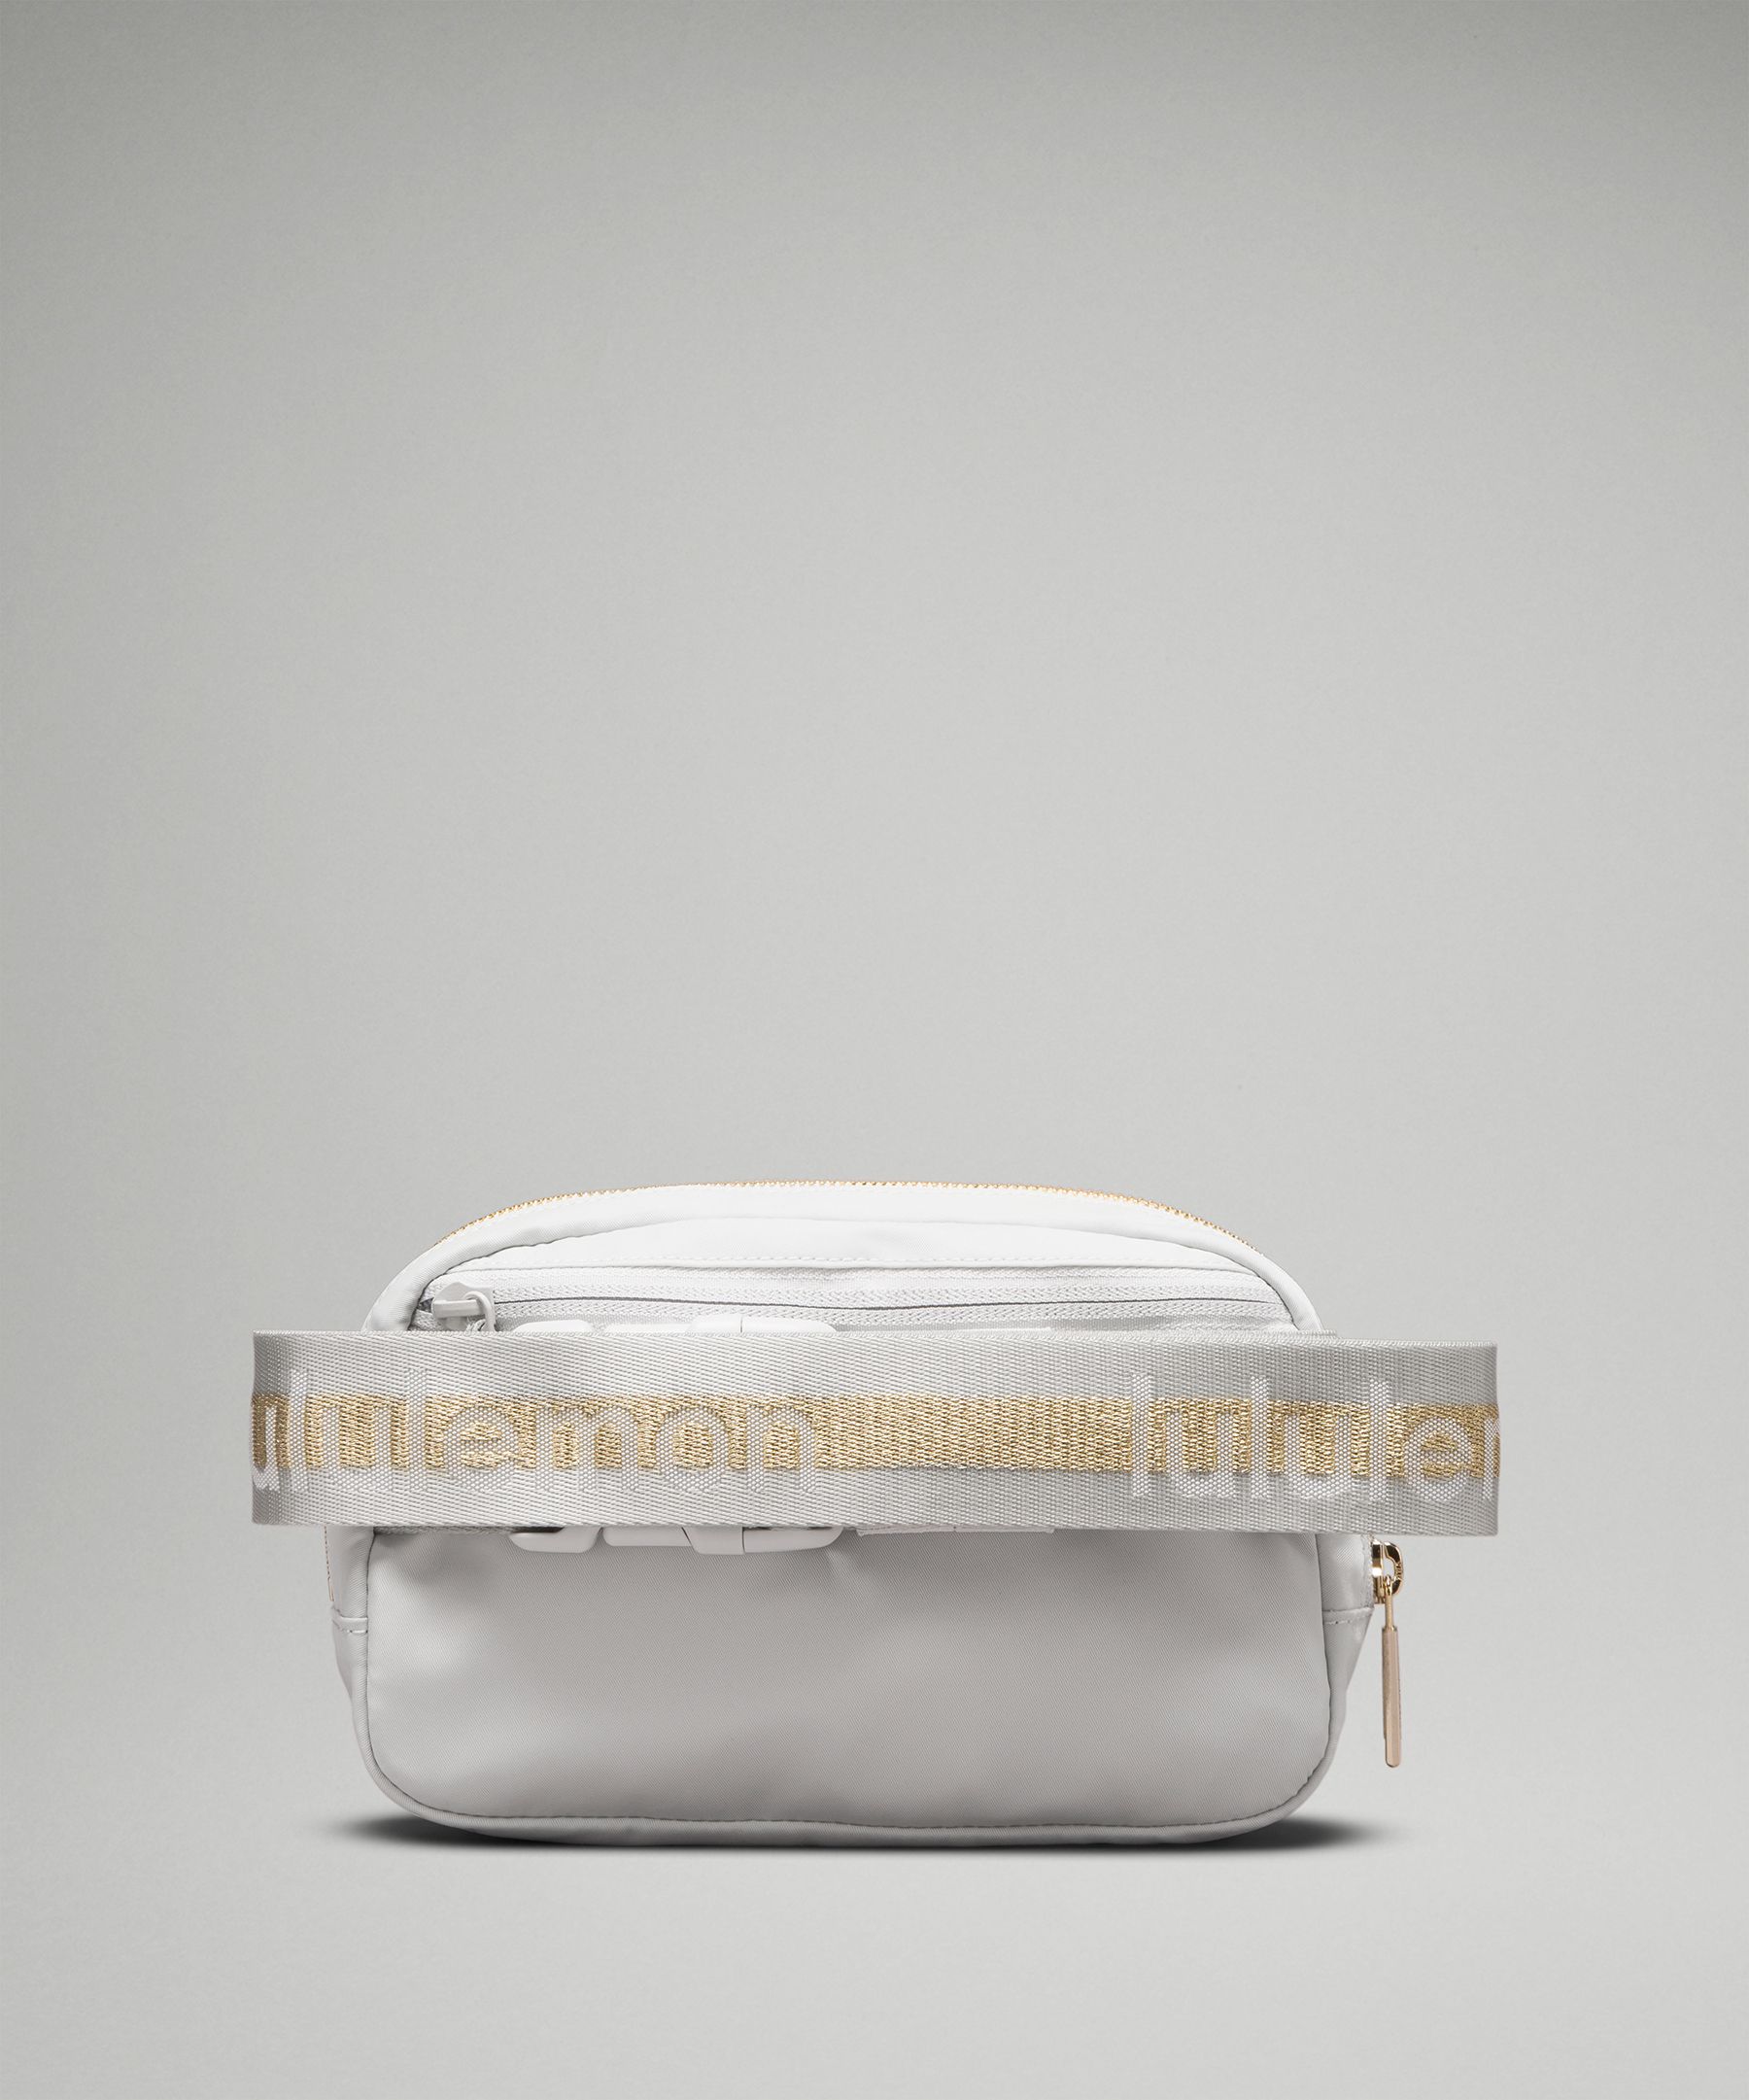 Clear To Me Purse In White  Clear White Sticthed Purse